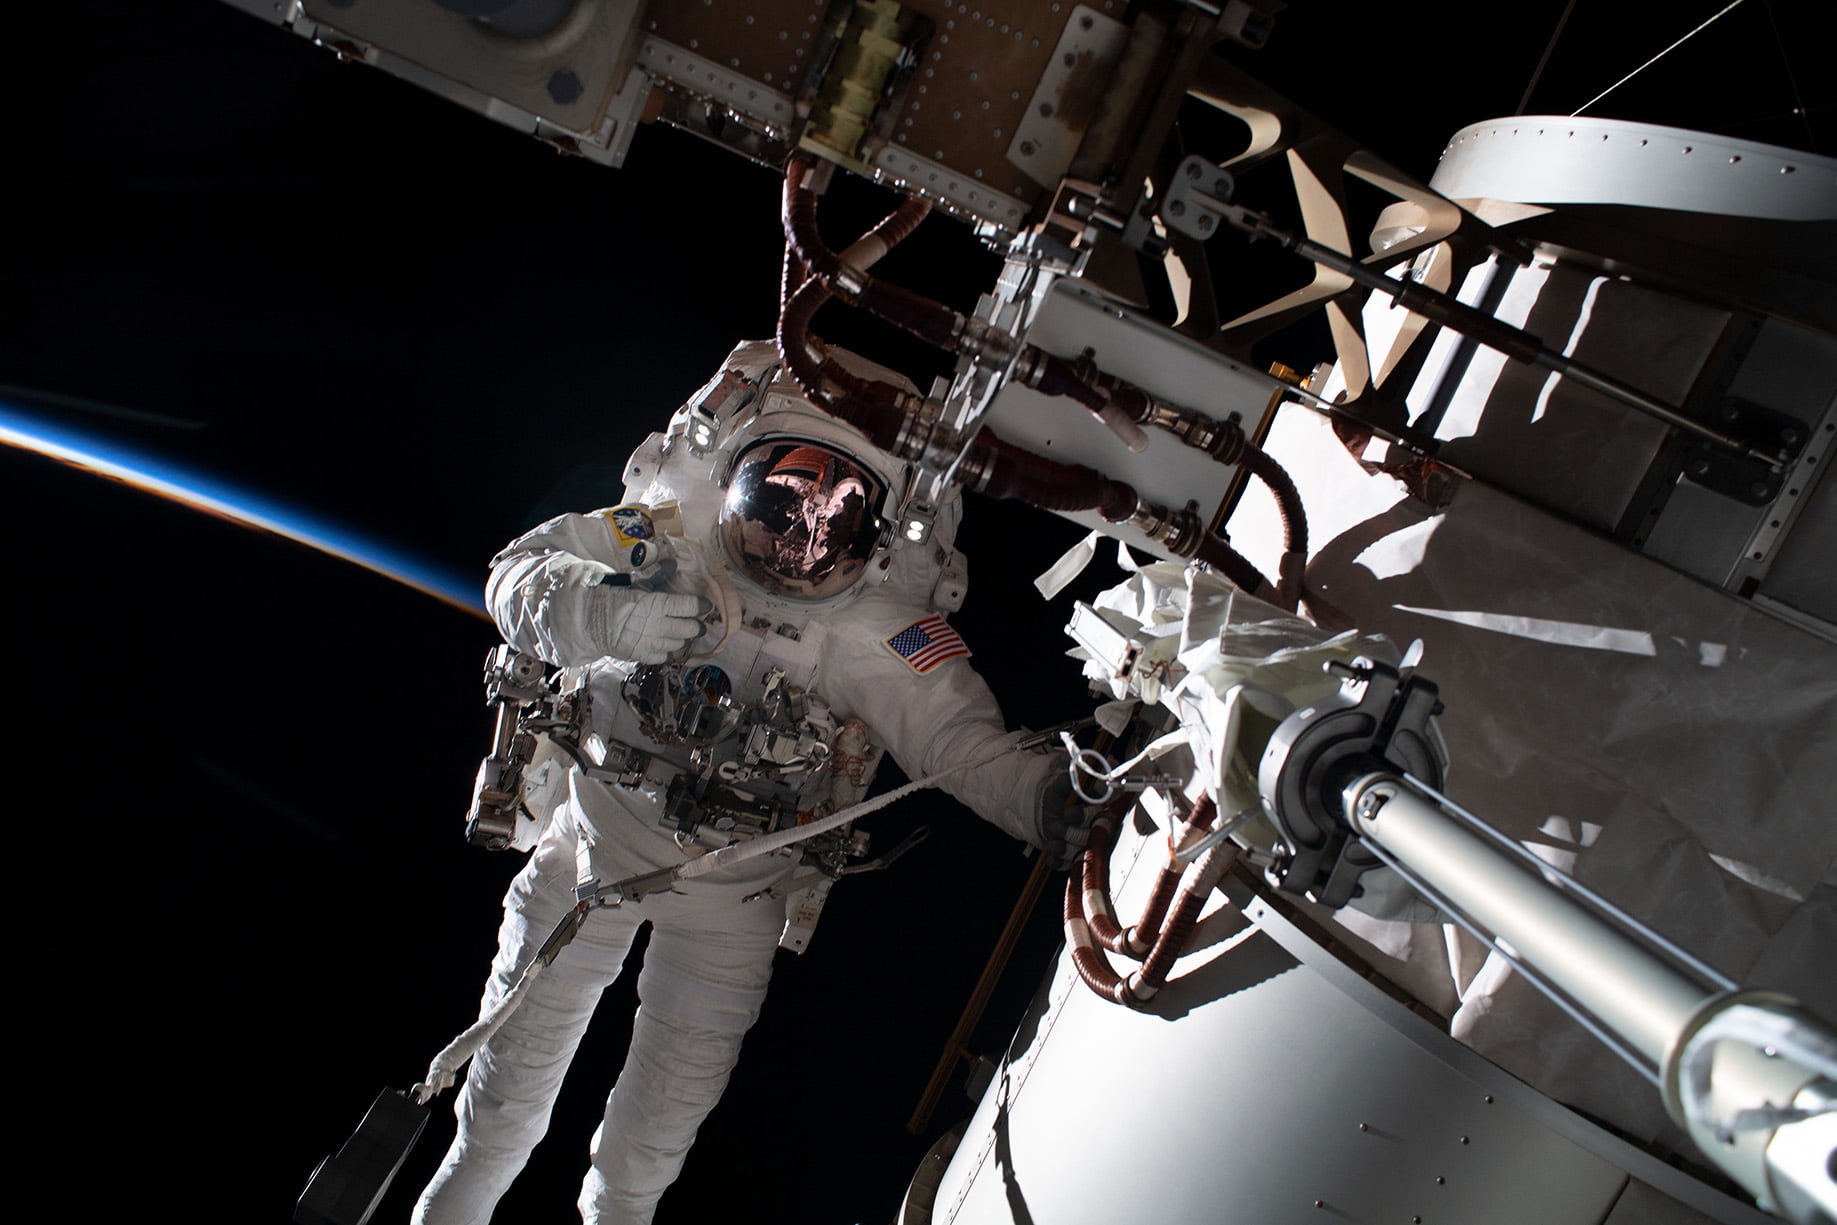 NASA spacewalker Frank Rubio is pictured during a spacewalk tethered to the International Space Station during an orbital sunset.